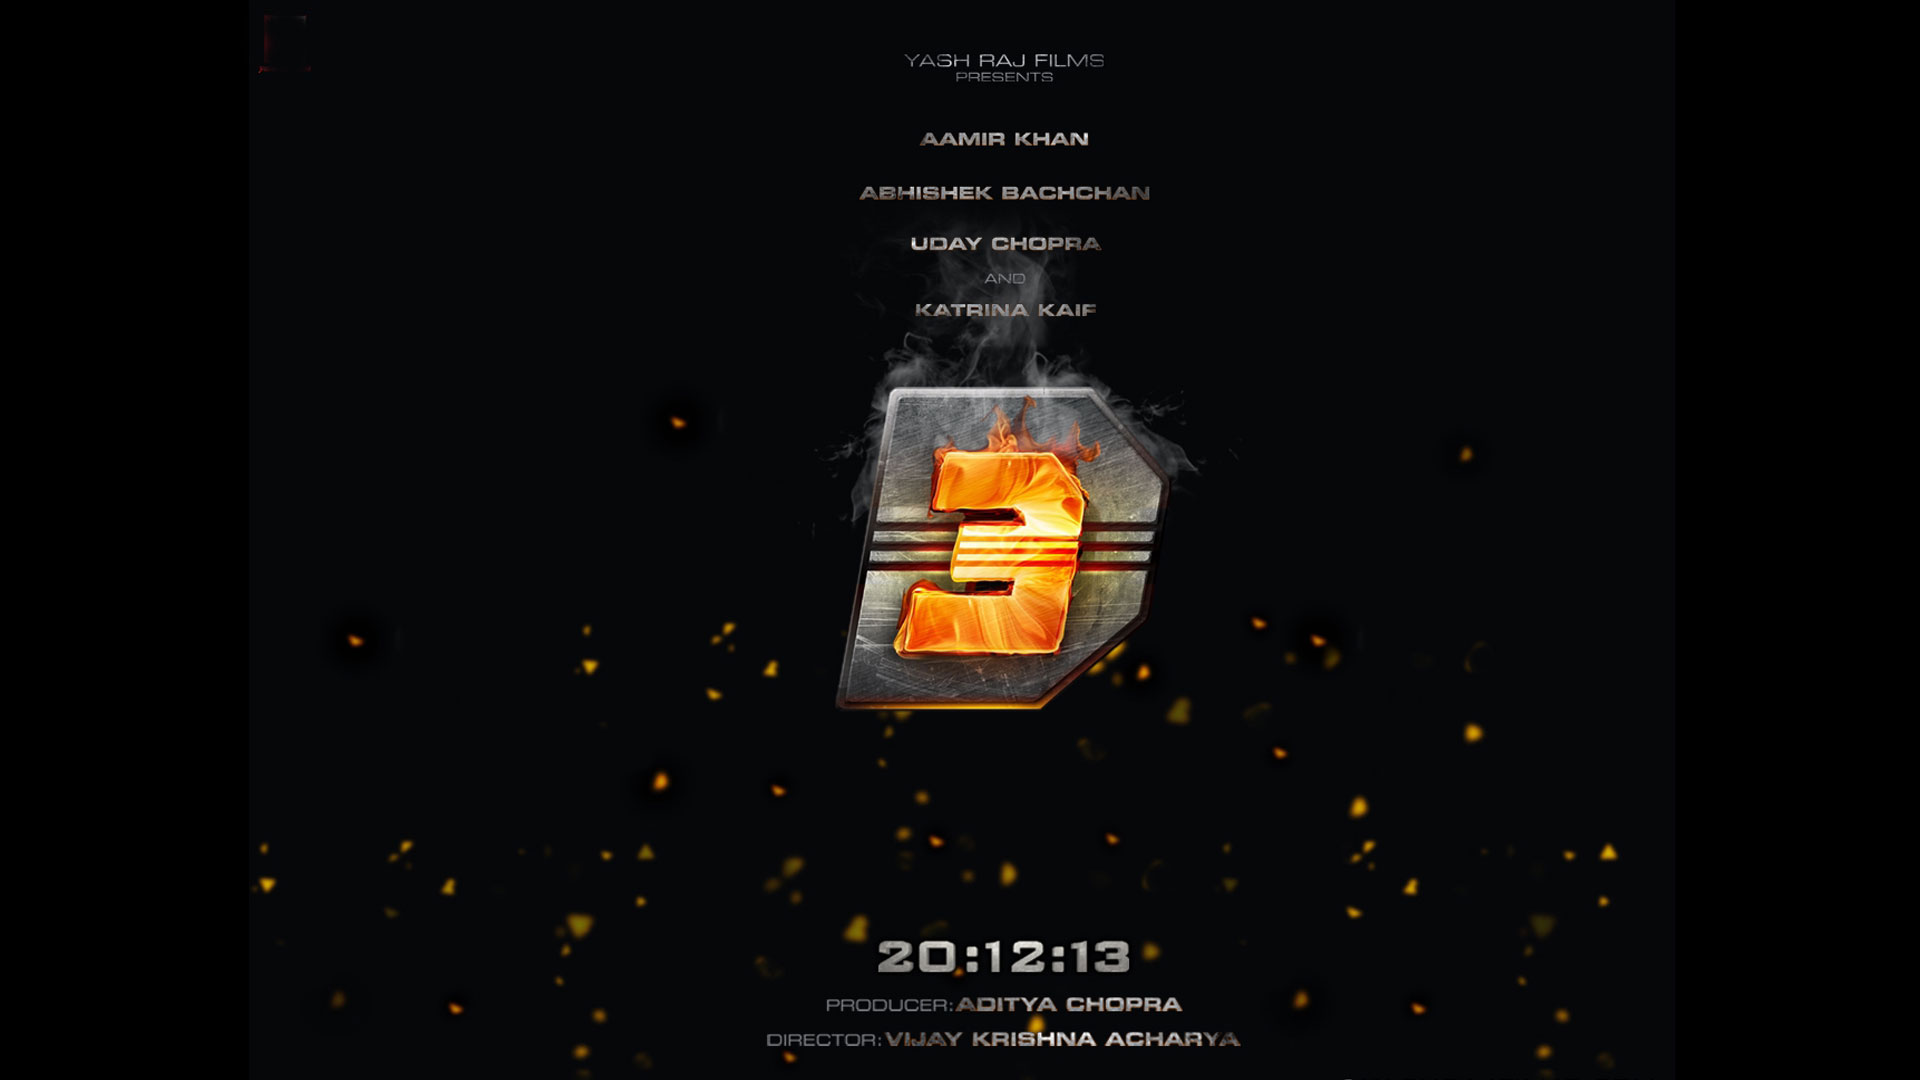 Dhoom 3 images | Wallpaper 4of 5 | Dhoom 3 Wallpapers | Dhoom 3 Movie wallpapers